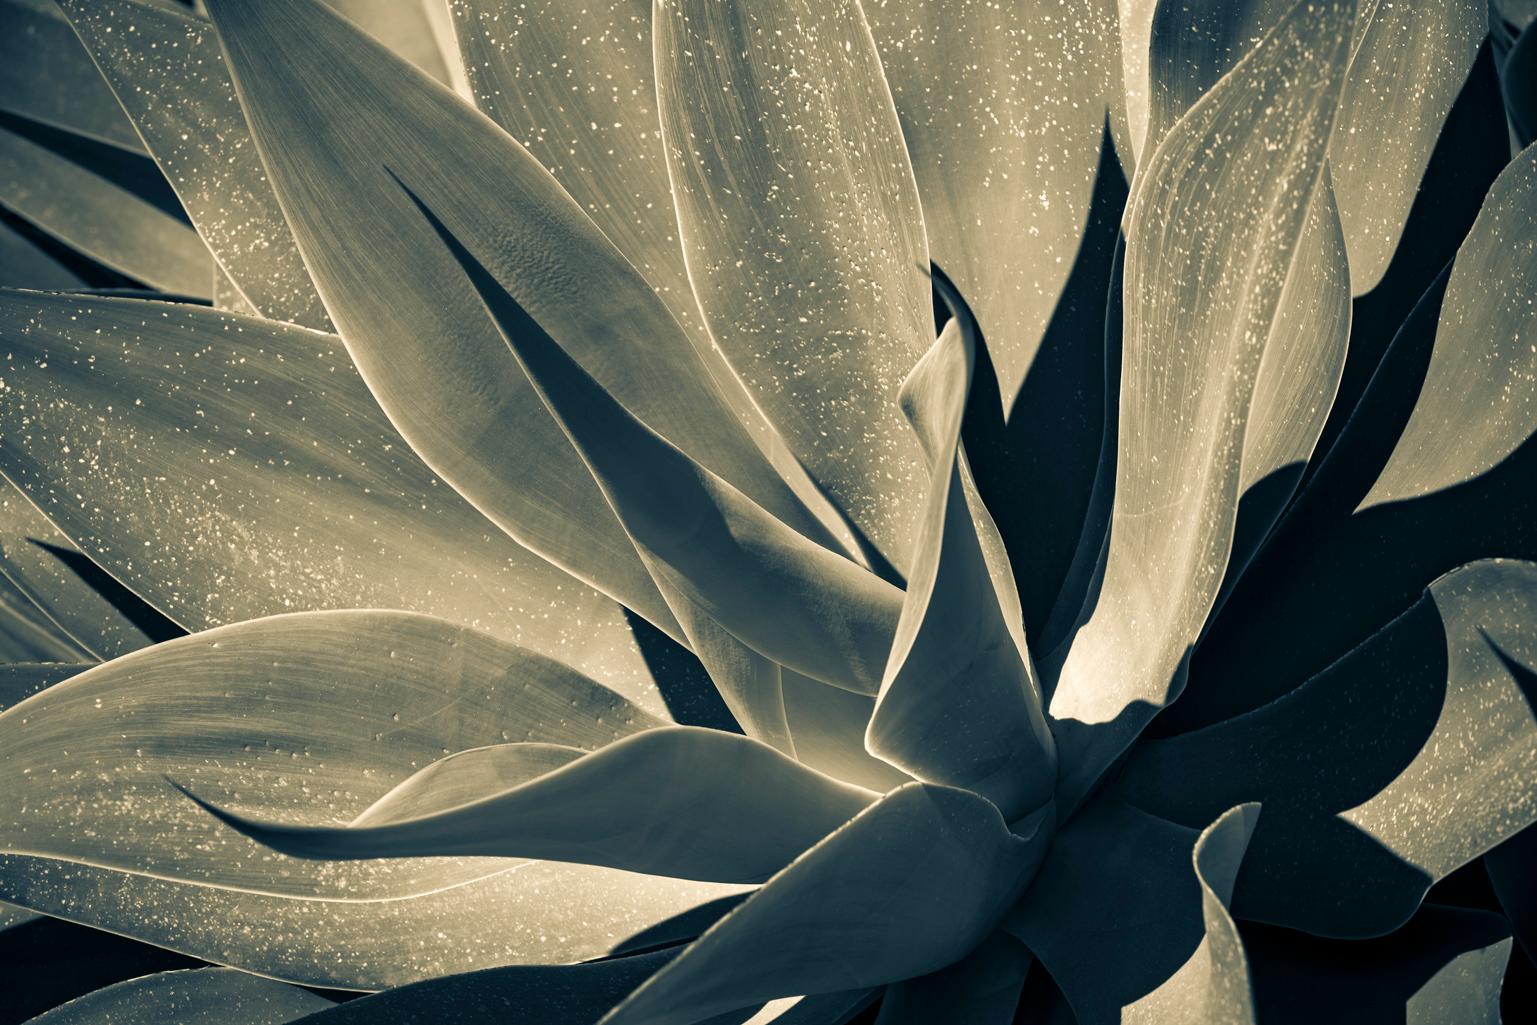 Yucca, Agrigento, Sicily - Gray Landscape Photograph by Cosmo Condina